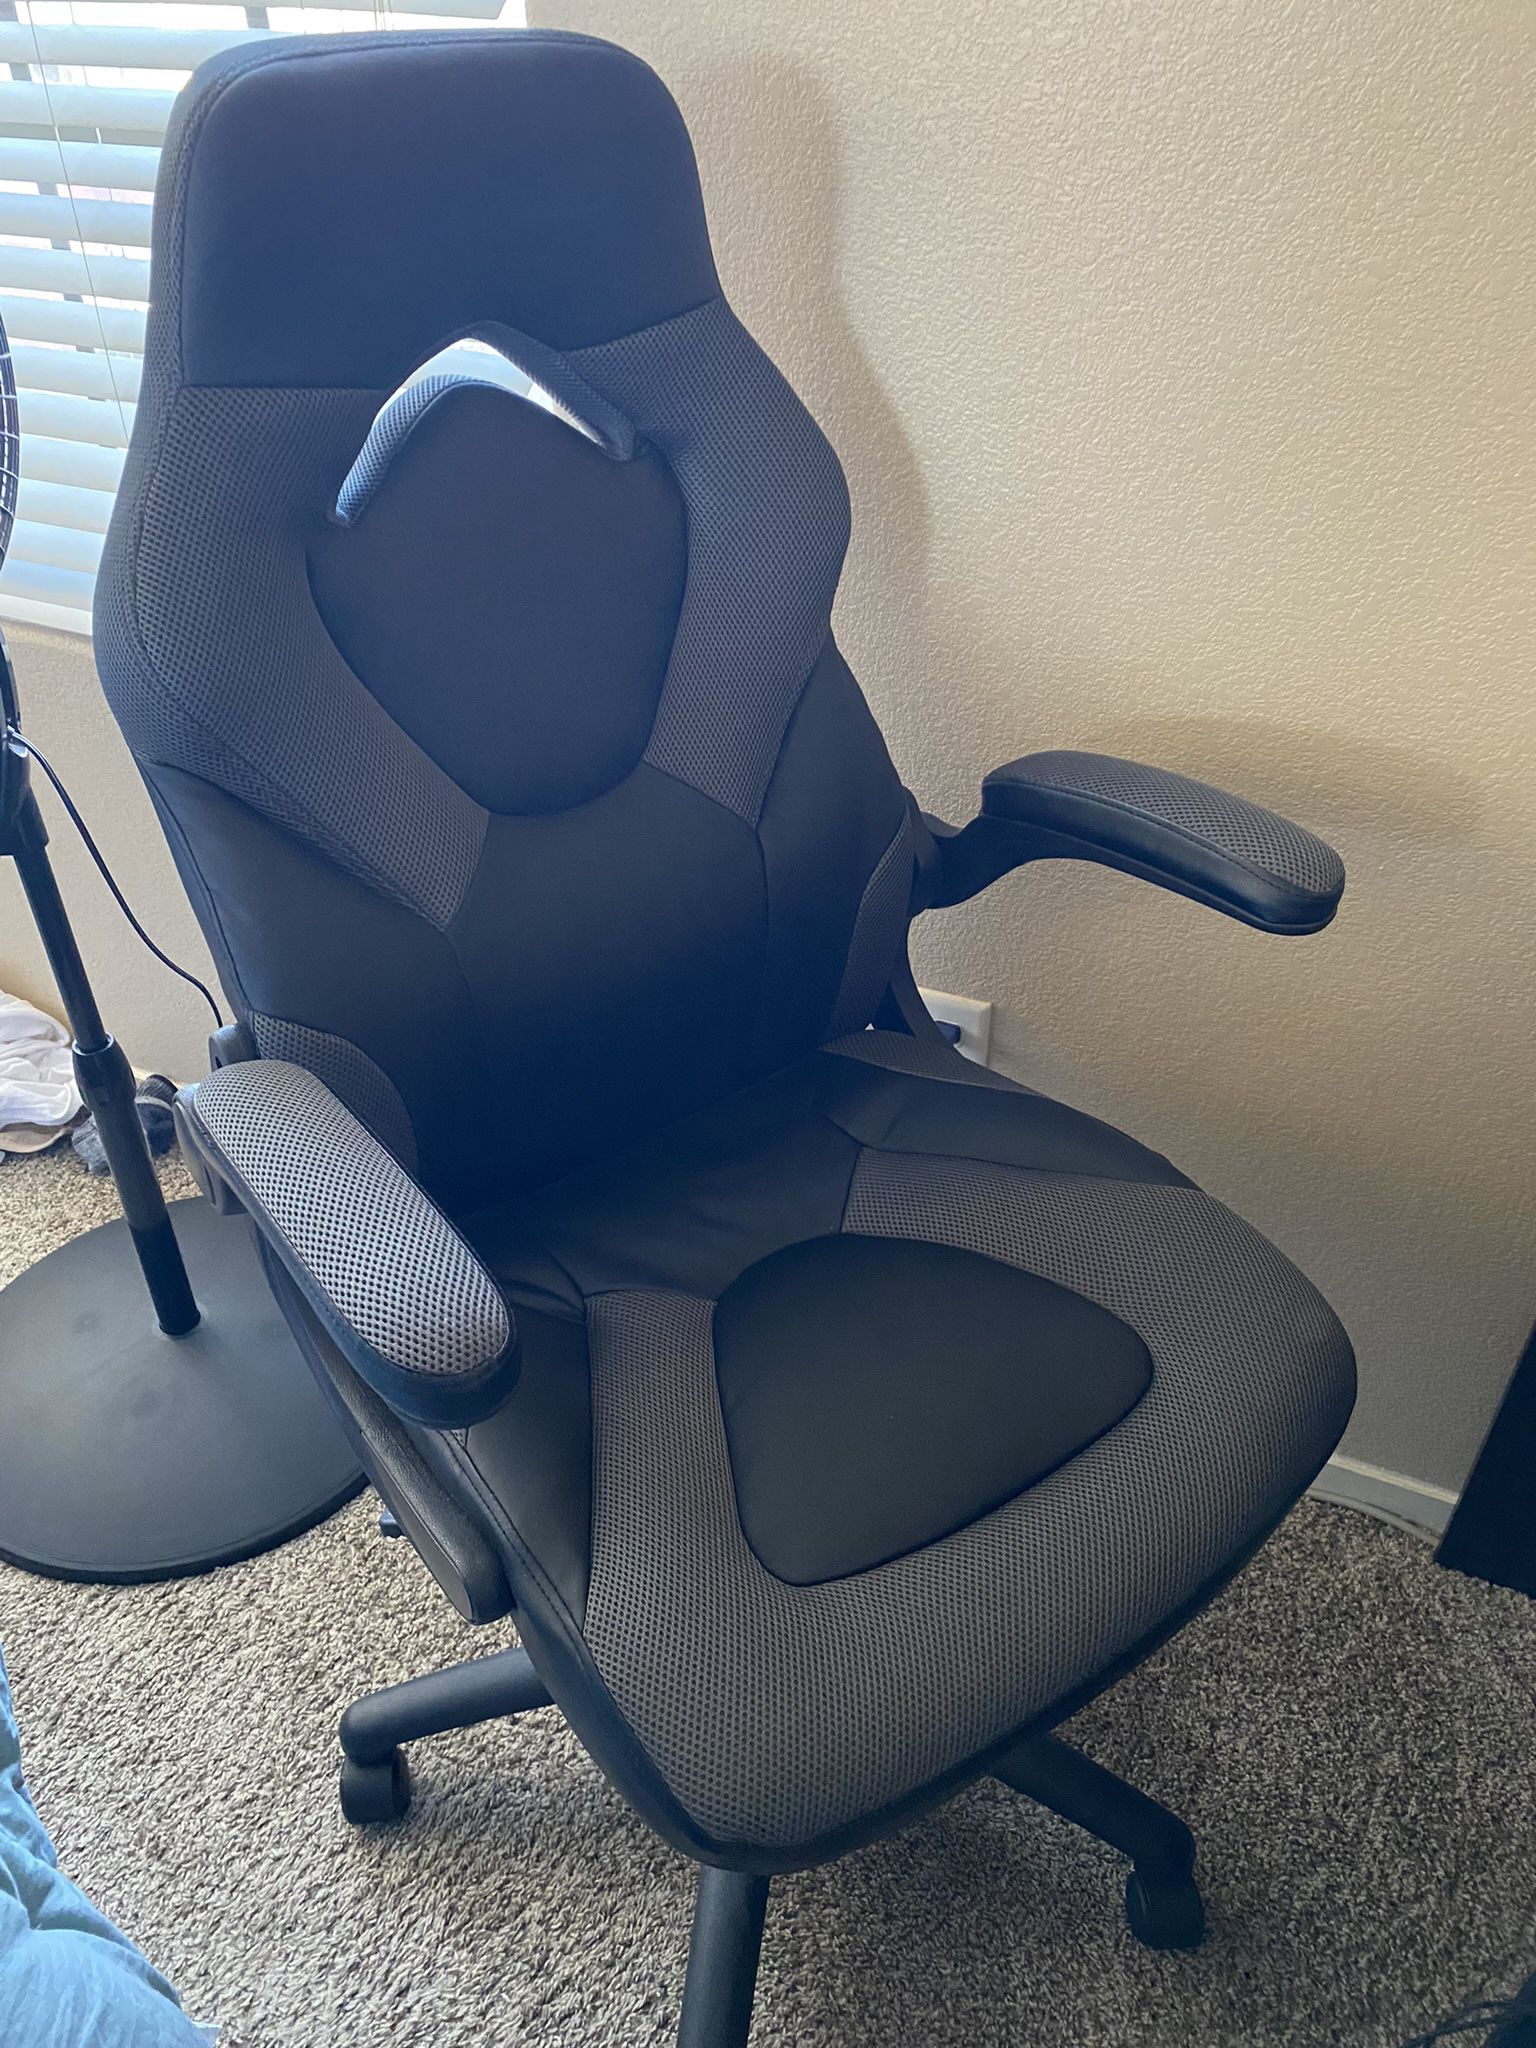 OFM Essentials Collection Gaming Chair